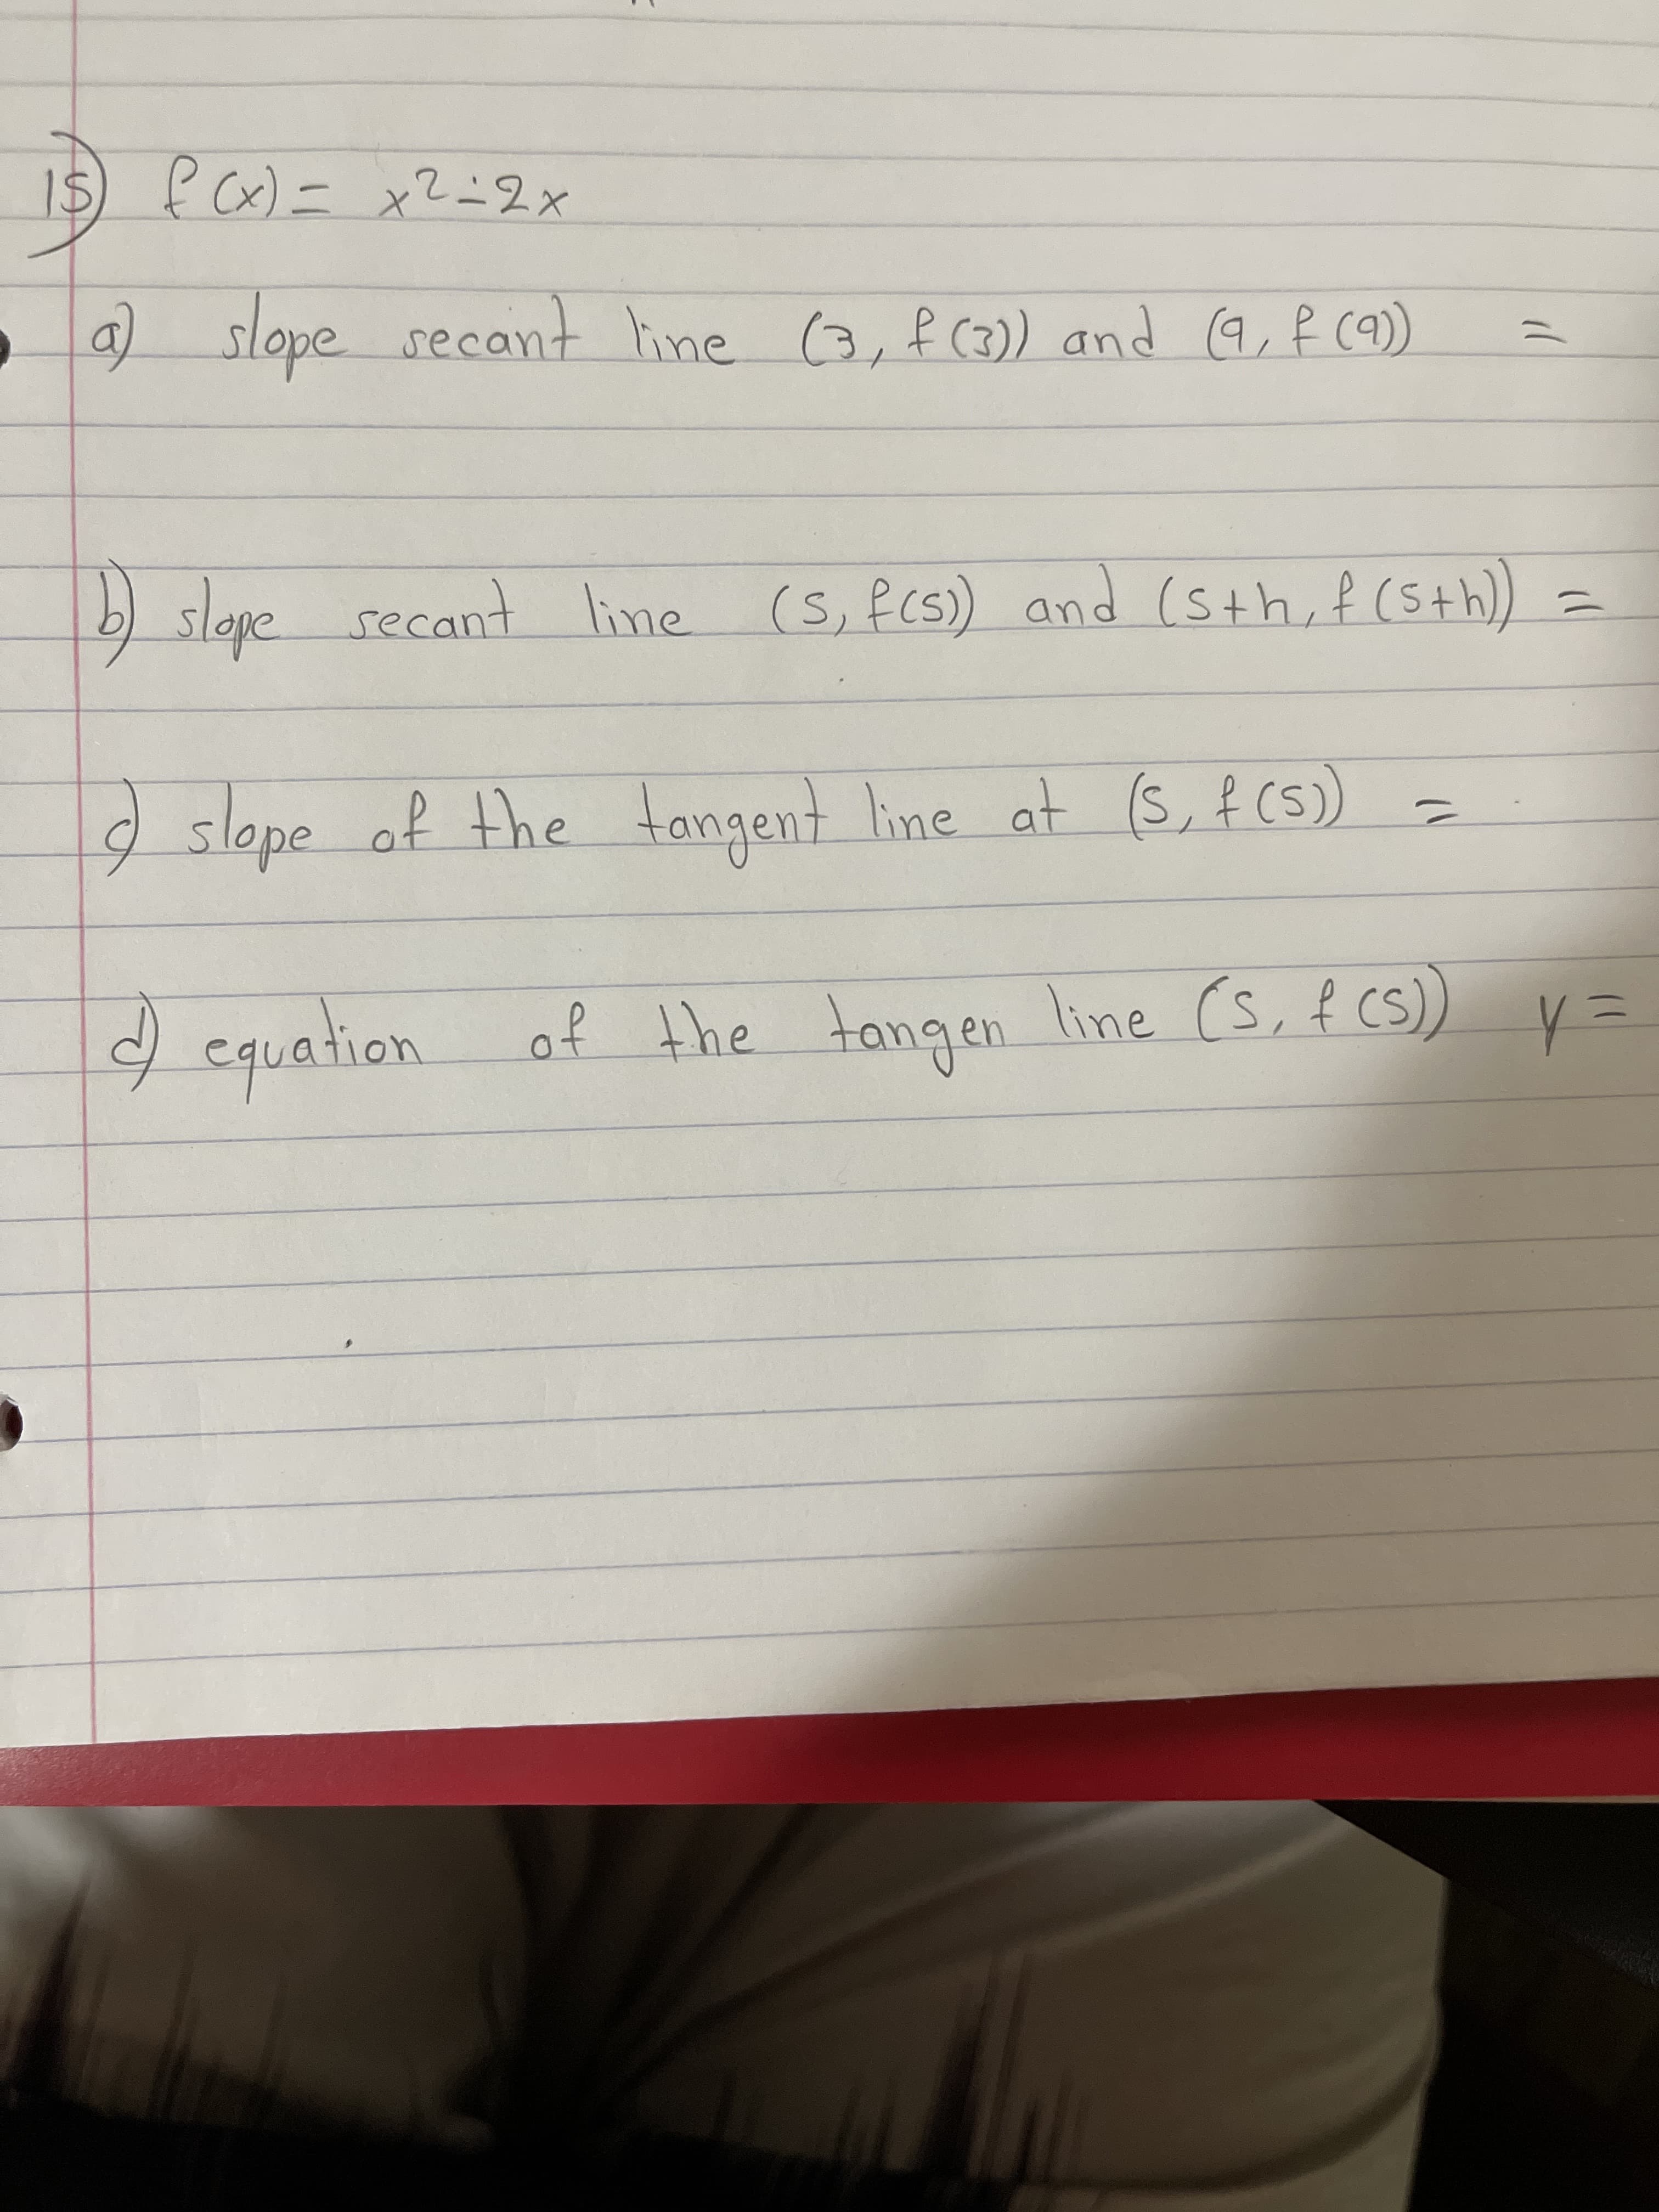 15) f Cx)=x?=2x
a) slope secant hine 3,f (3)) and (q, f c9)
b) secant line (s,fcs) and (sth, f (S+h)
slepe
line (S,fcs) and (sth, f (5th))
%D
slope of the =
tongent
line at (S, f ()
